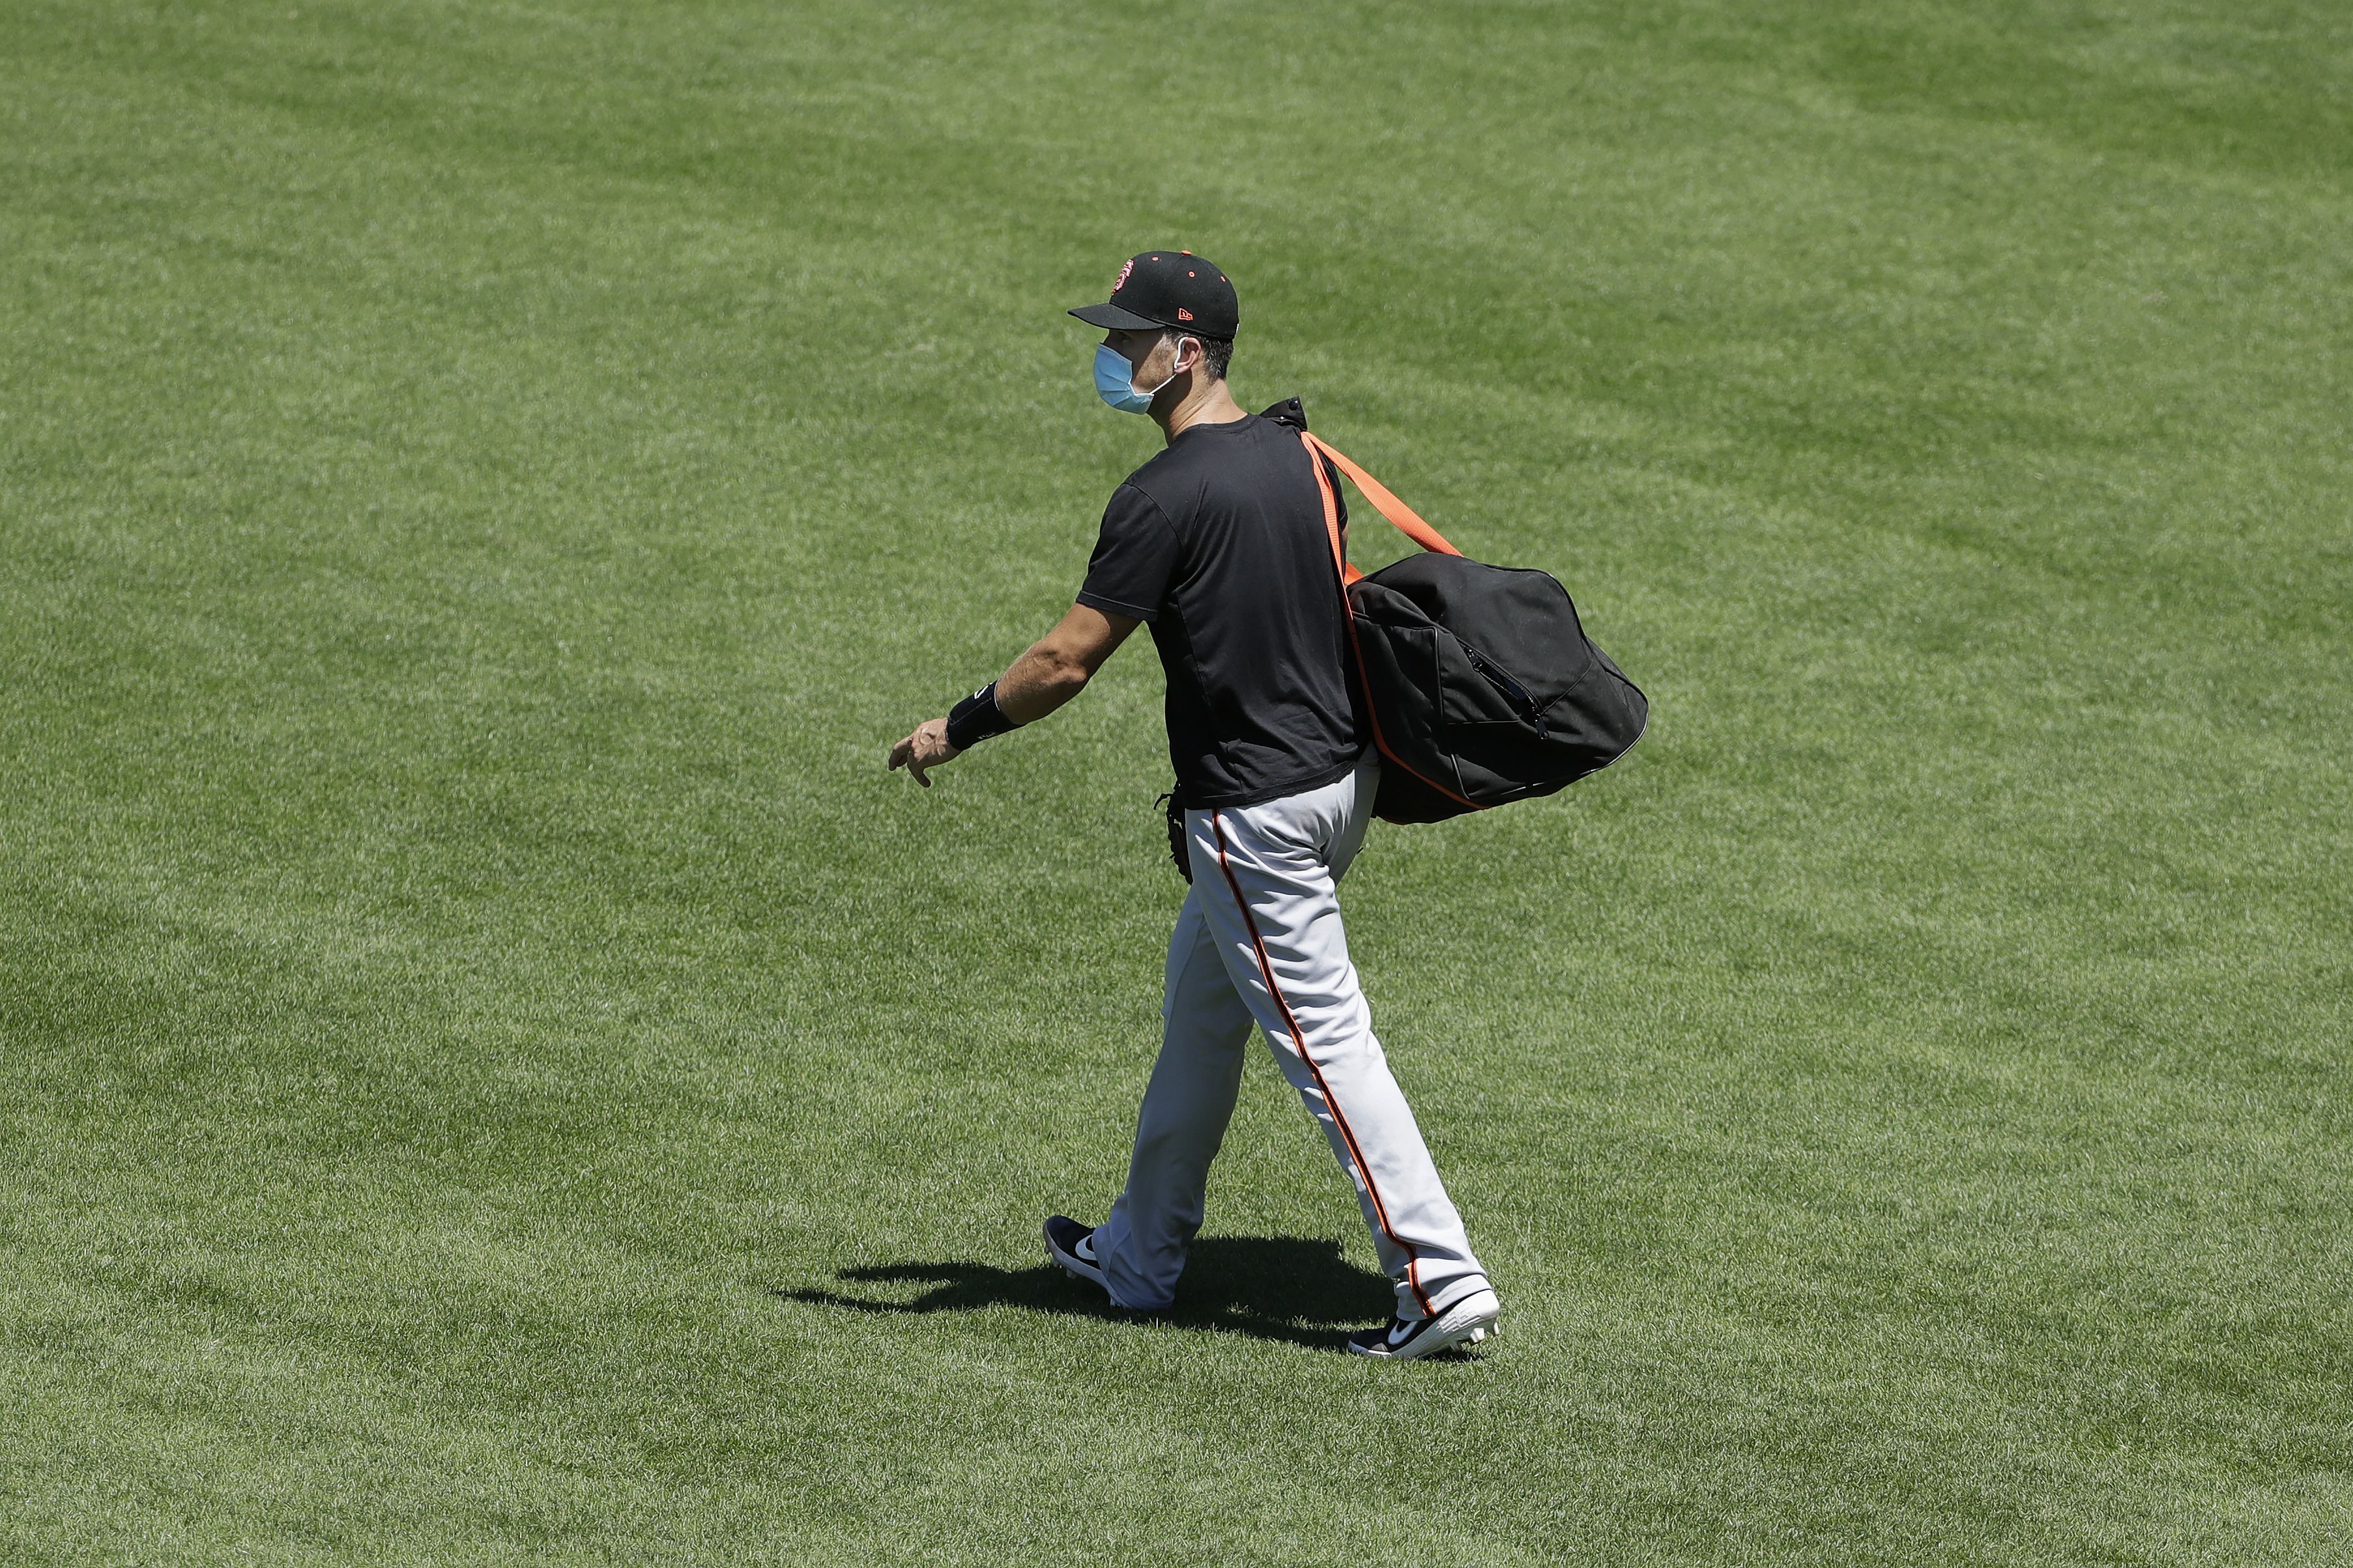 Giants evaluating replacements for Buster Posey